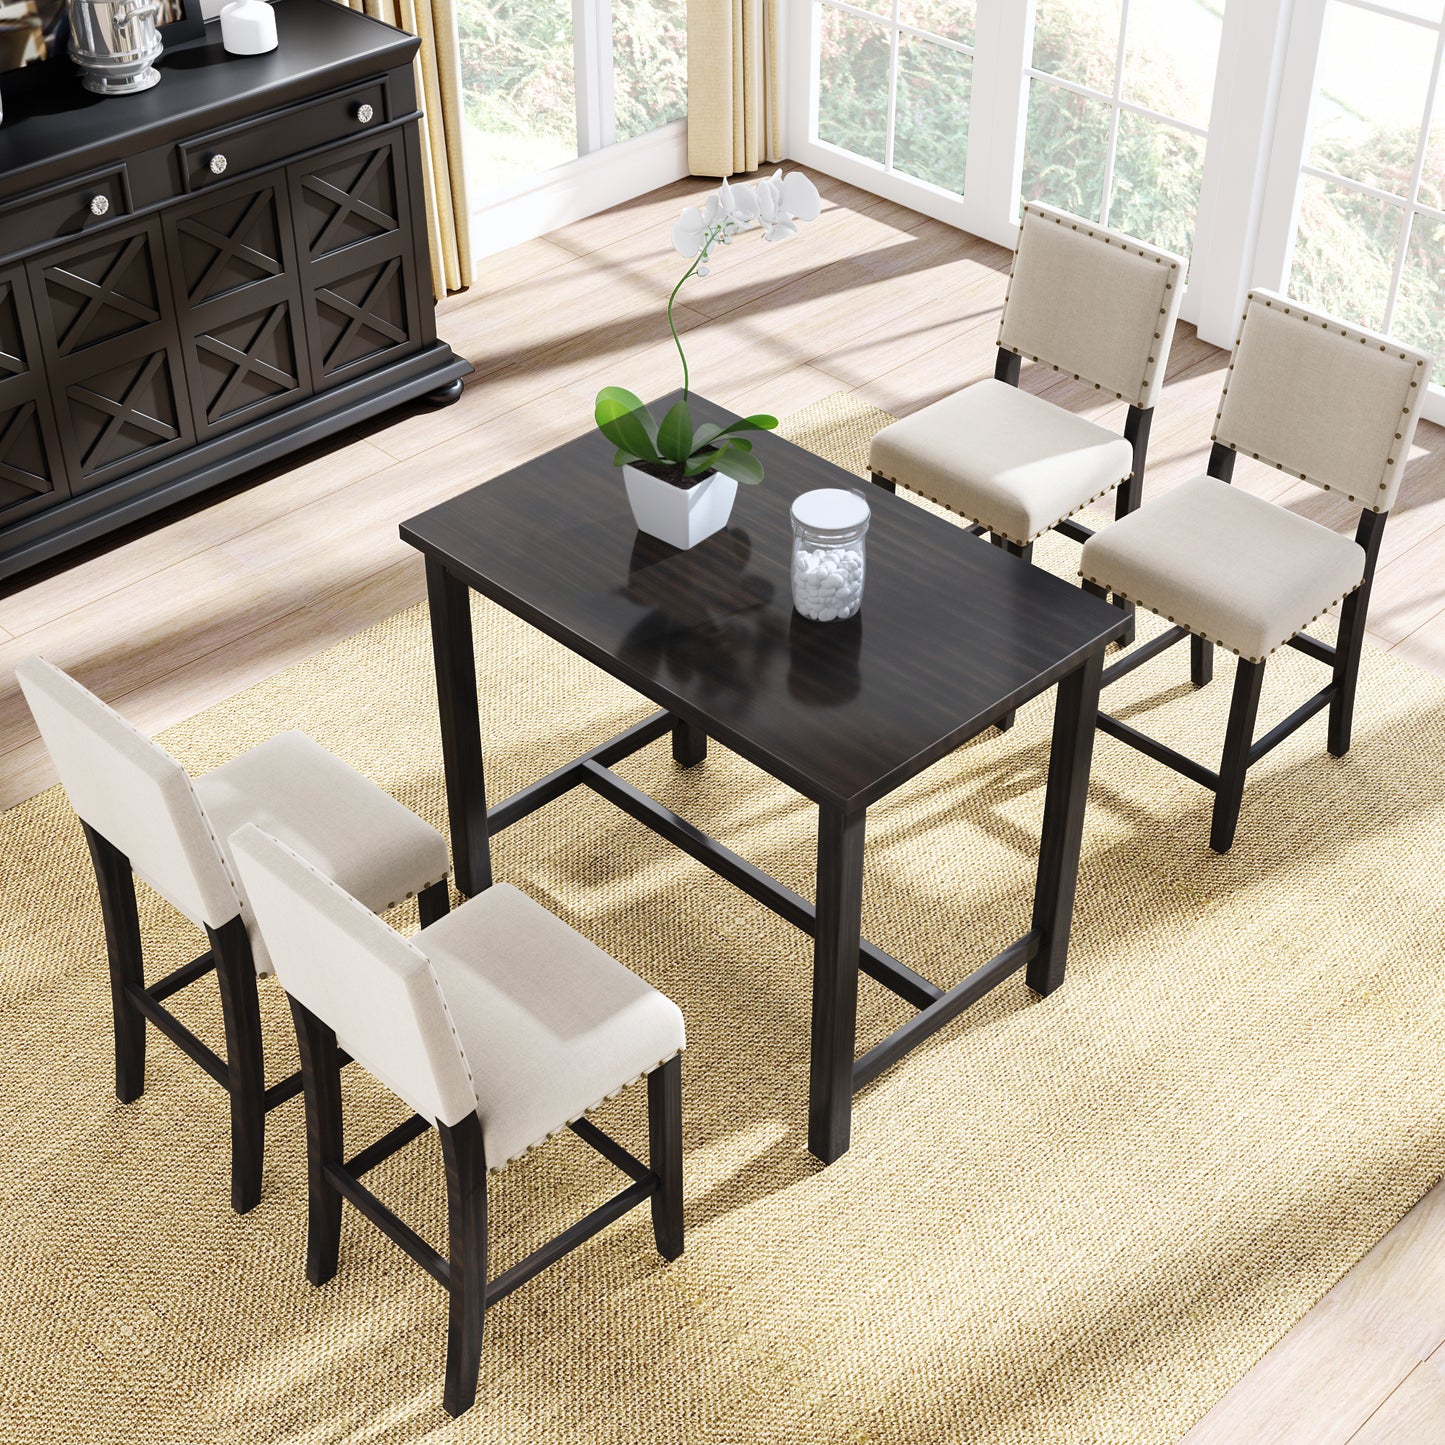 5 Piece Rustic Wooden Counter Height Dining Table Set with 4 Upholstered Chairs for Small Places, Espresso+ Beige